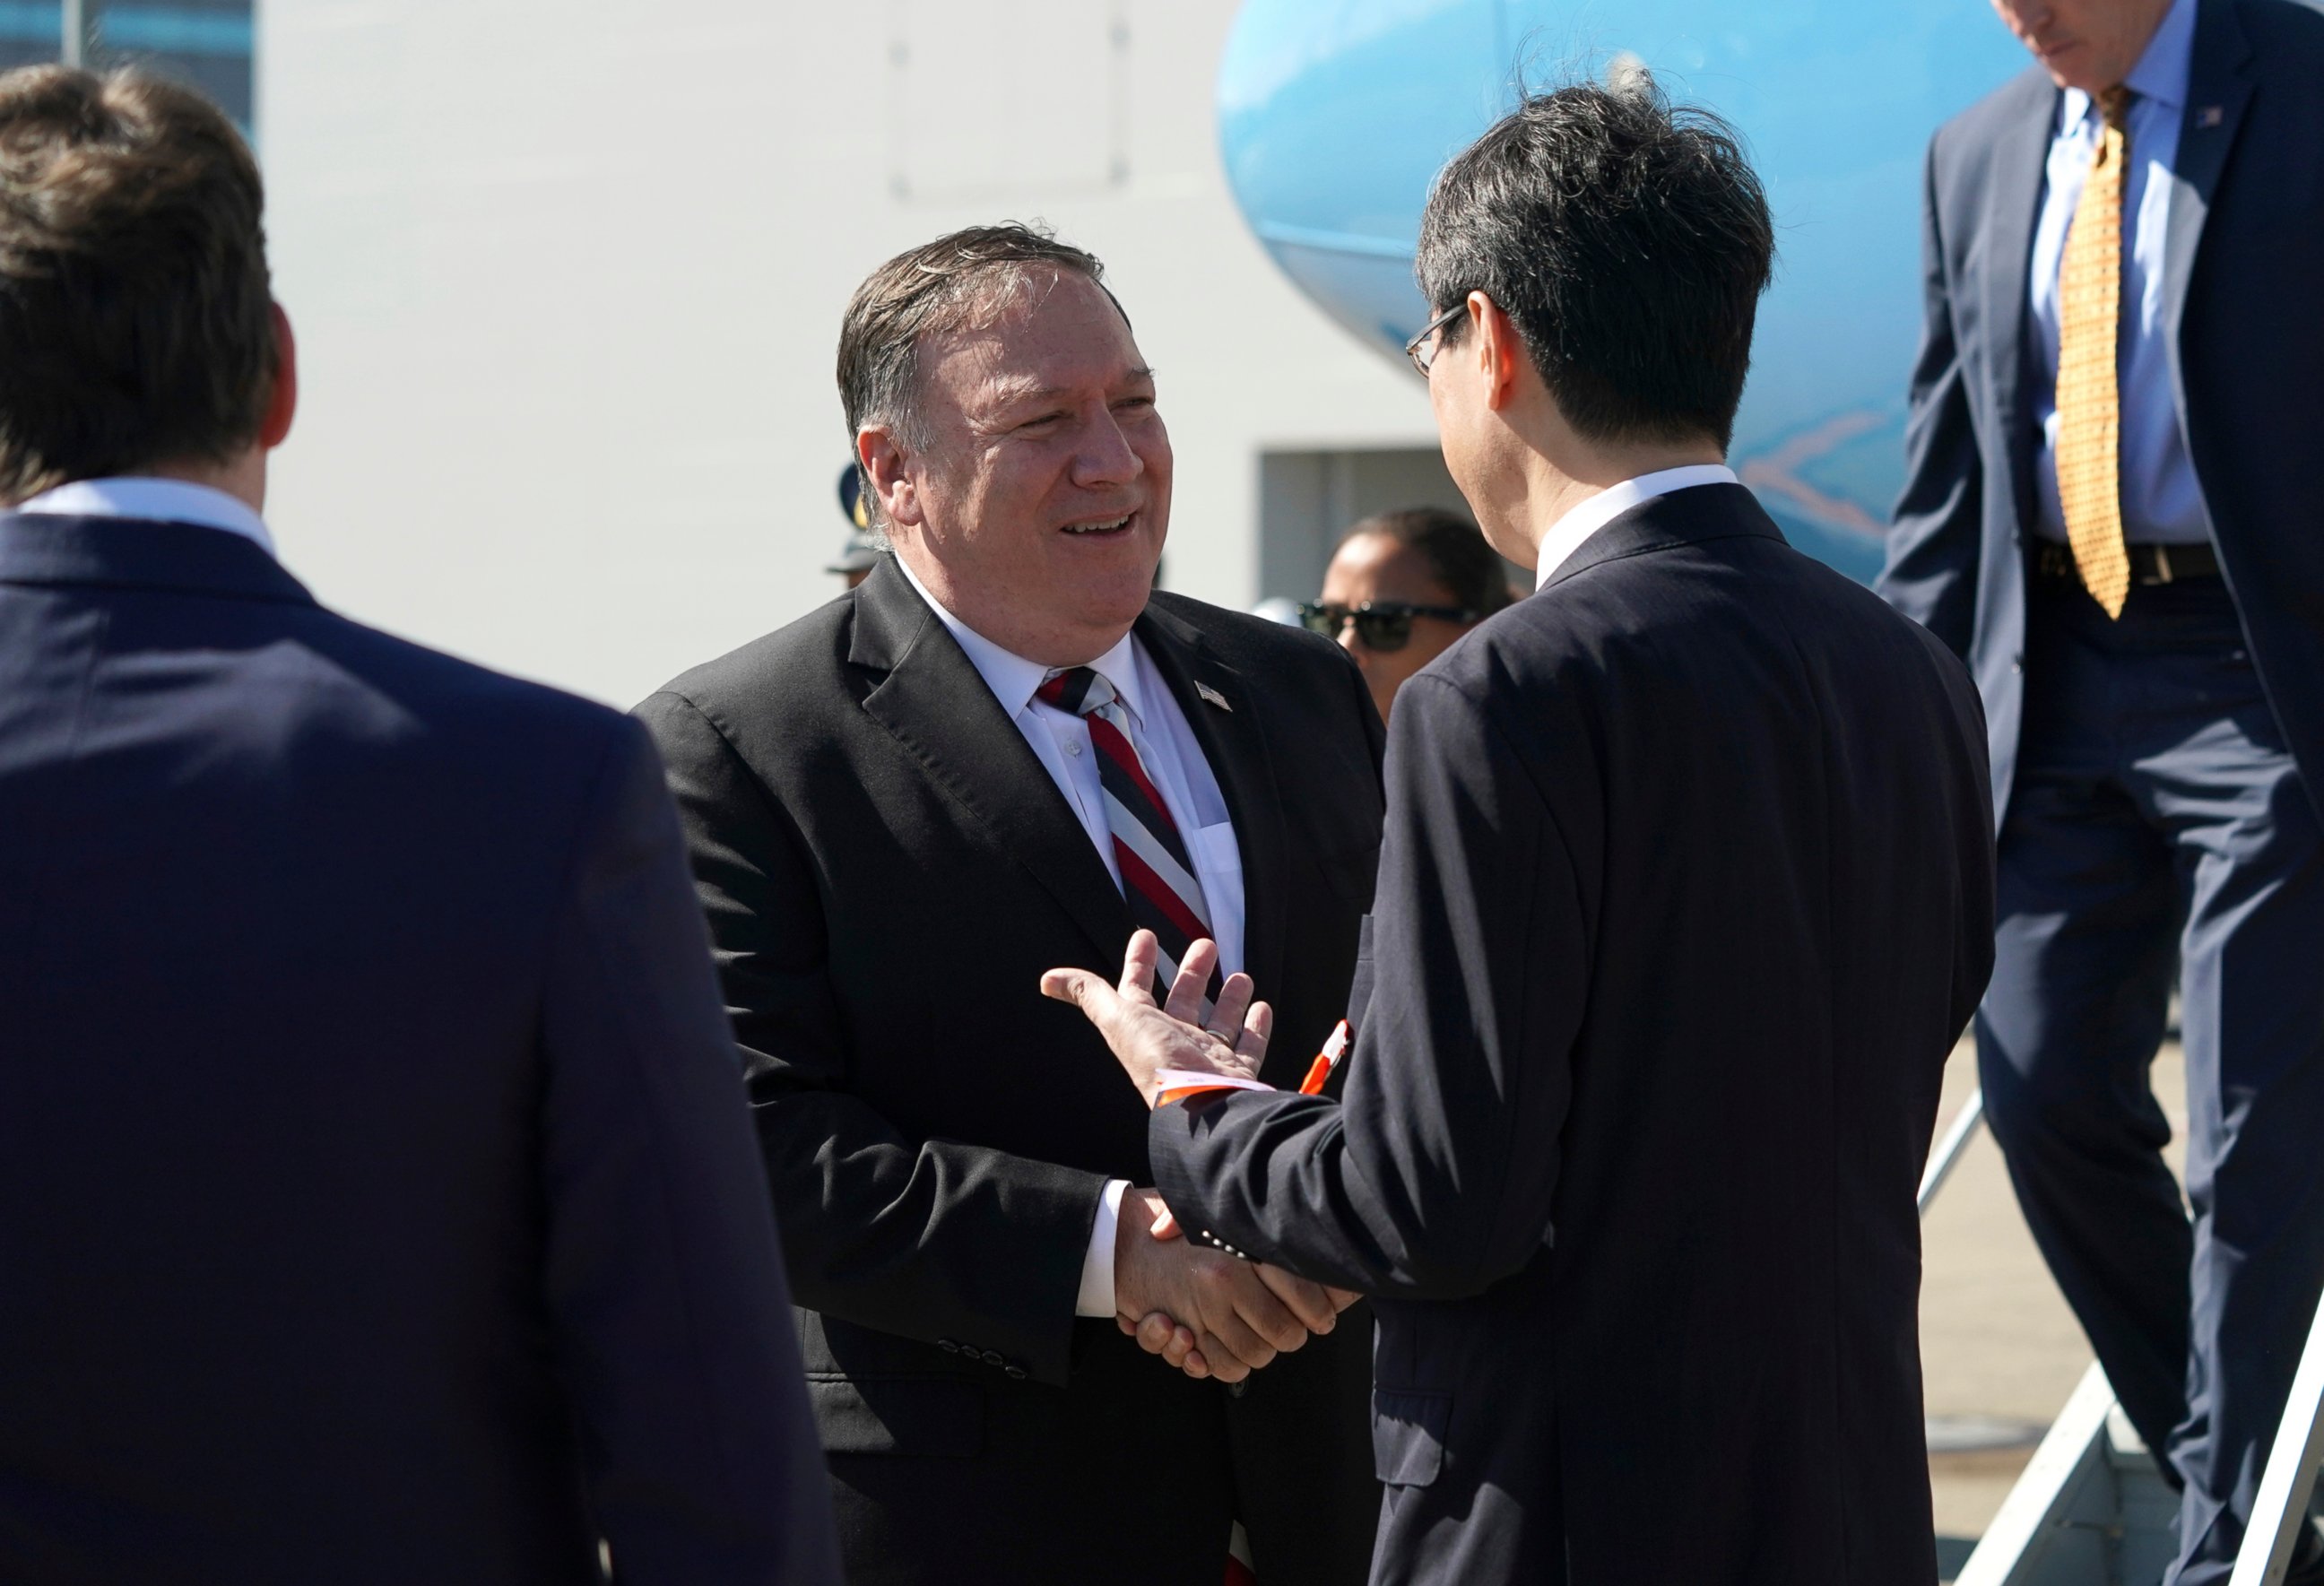 PHOTO: U.S. Secretary of State Mike Pompeo, center, is welcomed by officials upon his arrival at Haneda Airport in Tokyo Saturday, Oct. 6, 2018.